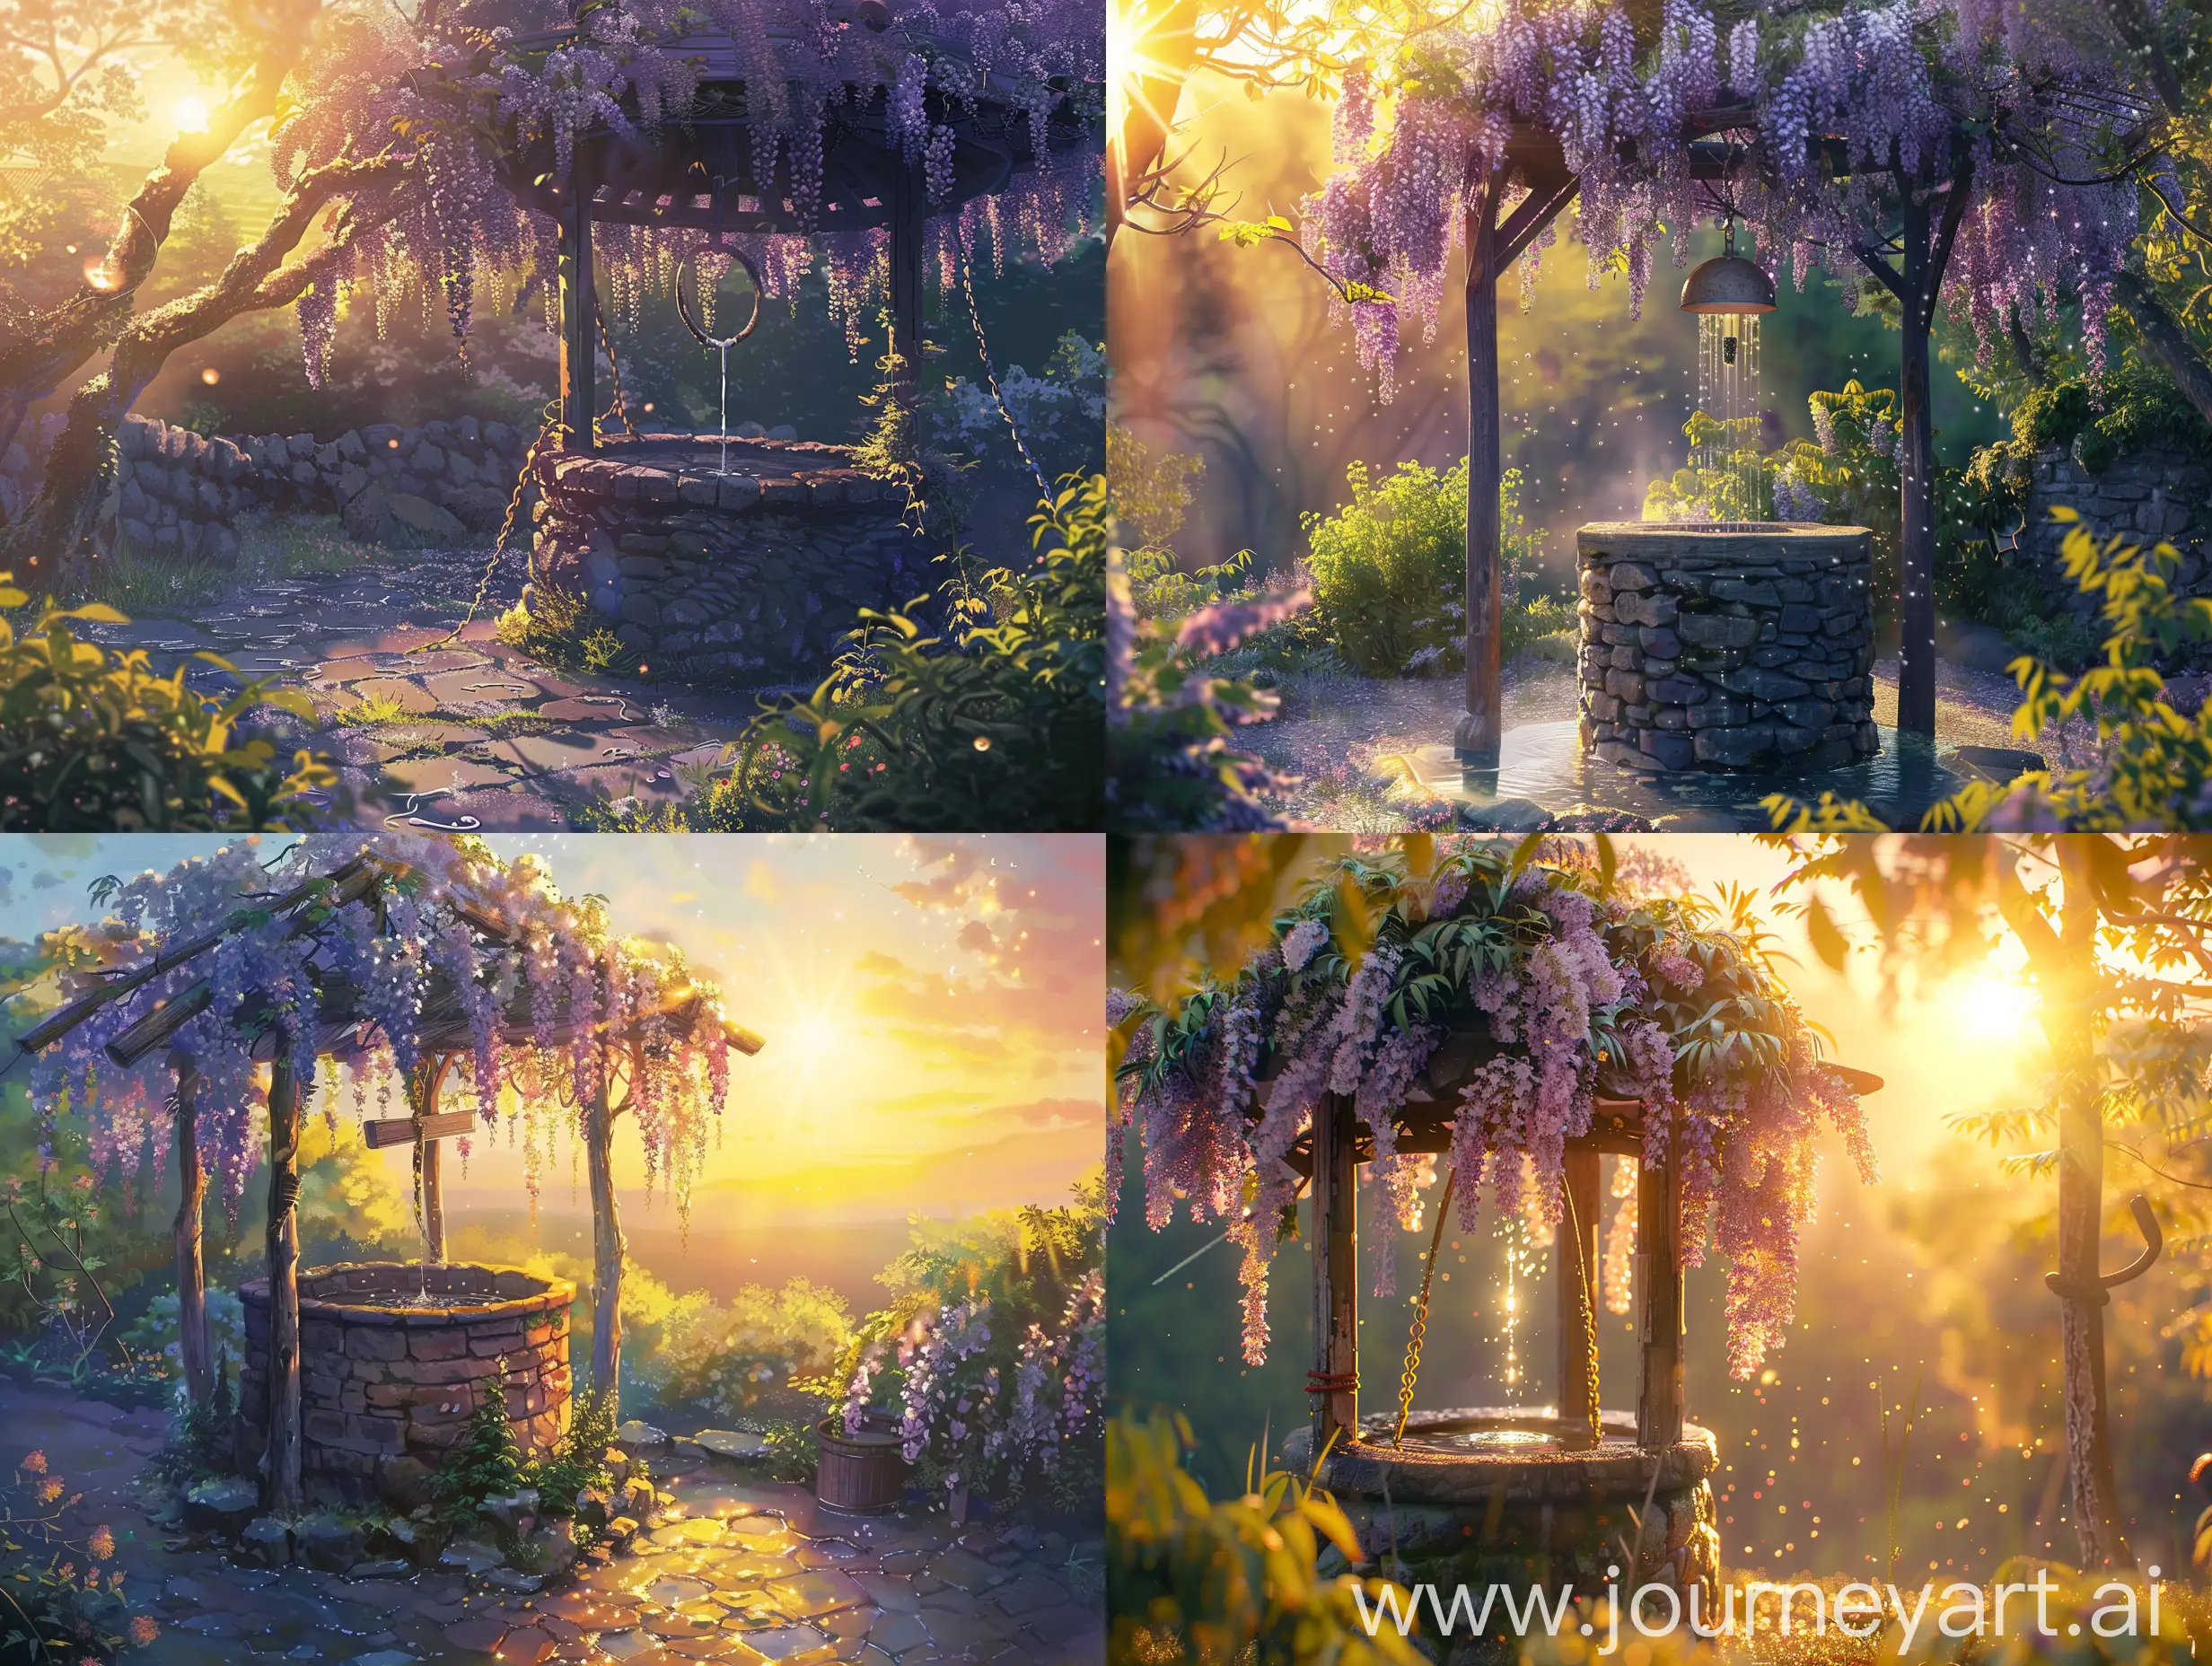 Morning-Sunlight-Over-Wisteria-Covered-Well-Ghibli-Style-Anime-Art